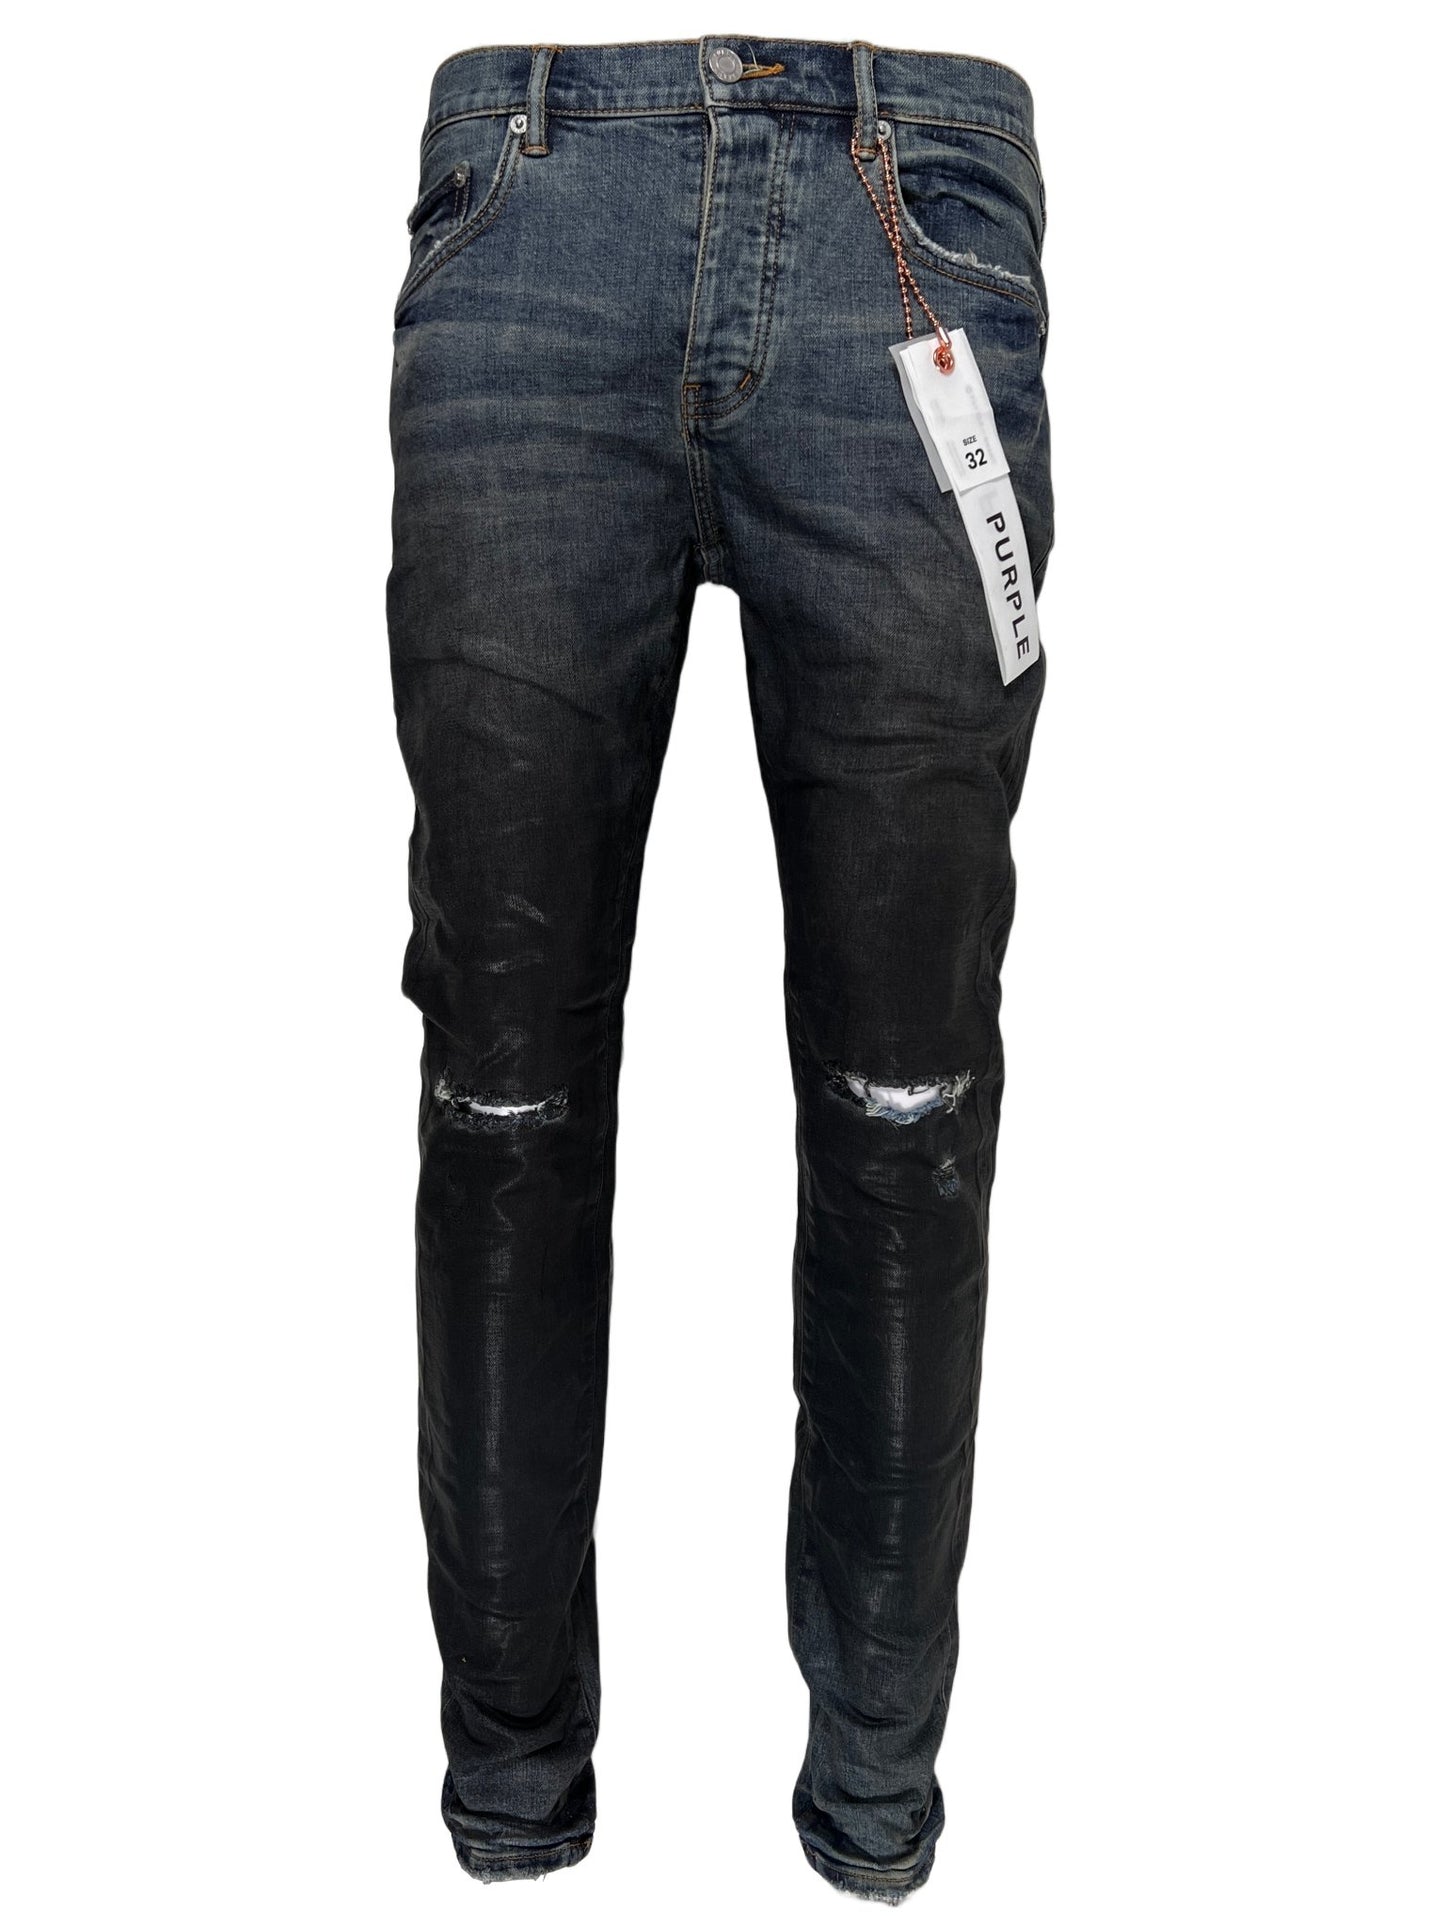 A pair of men's jeans with a tag from PURPLE BRAND JEANS P001-IBCG MID INDIGO BLACK COATED GRADIENT on them.